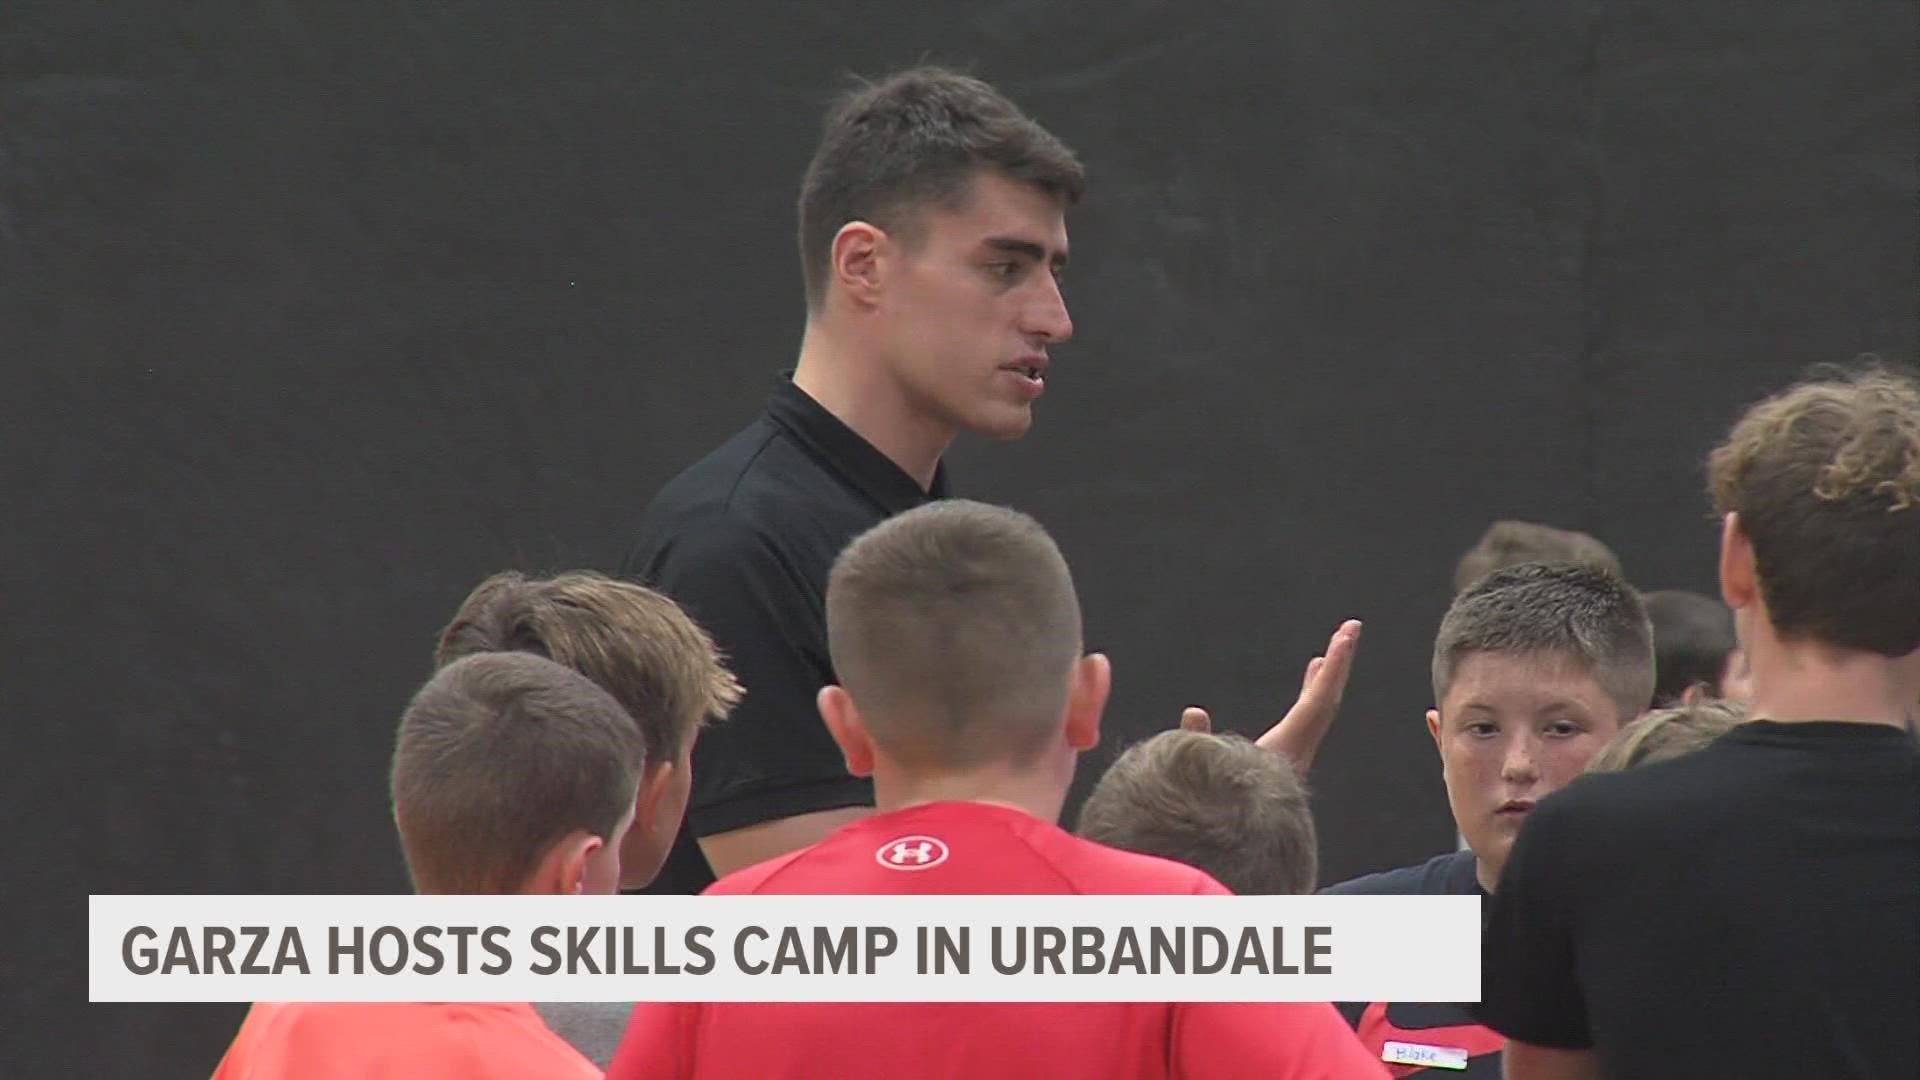 Luka Garza brought guest coaches including current Hawkeyes, Connor and Patrick Macaffery. Previously, Garza hosted camps in Davenport and Cedar Rapids.